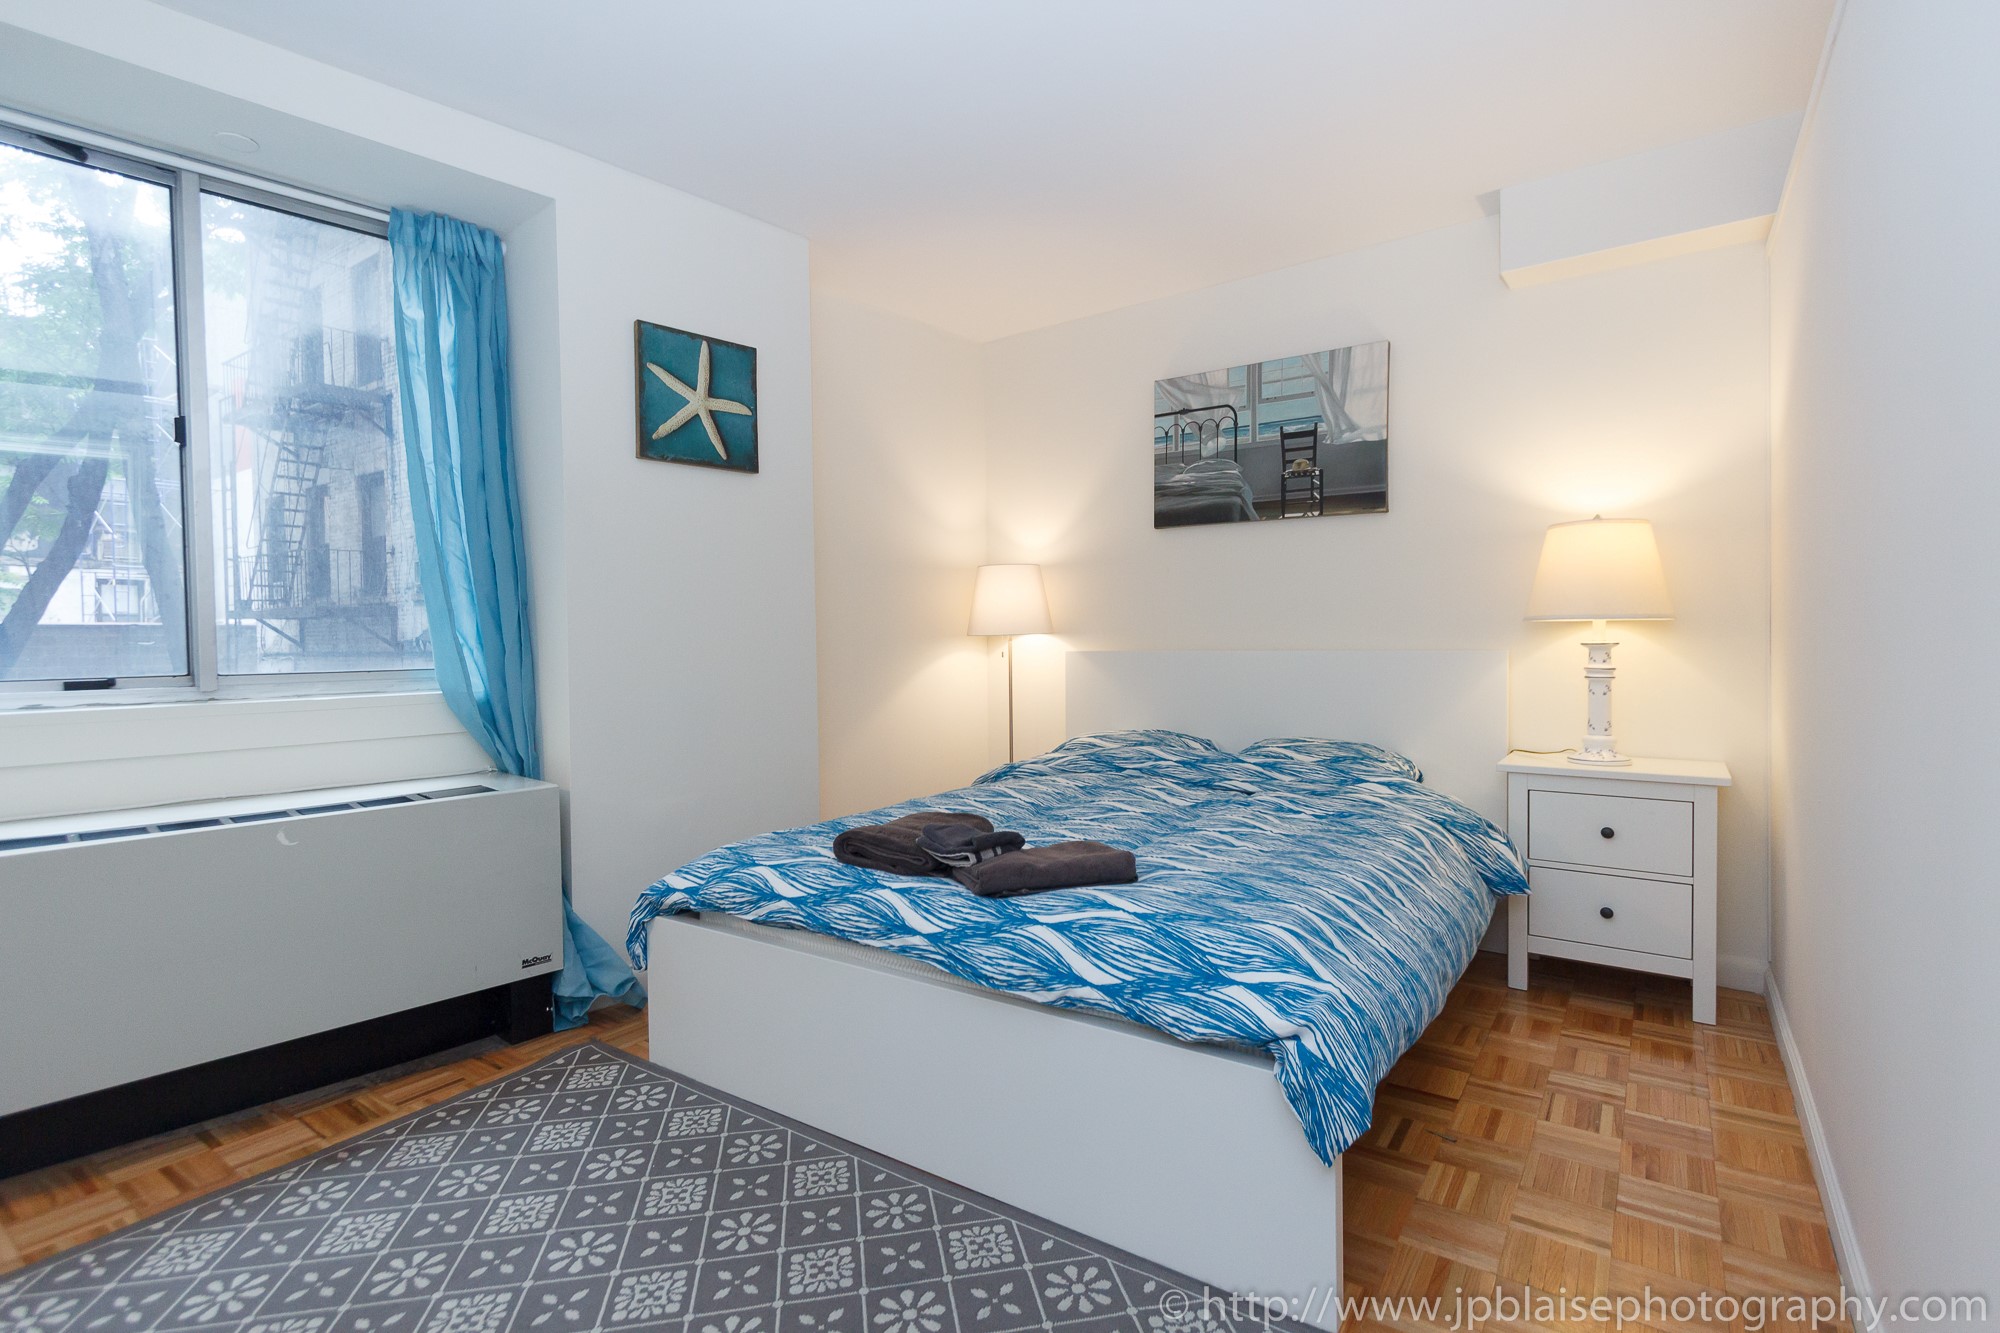 Apartment-photographer-New-York-City-Two-Bedroom-Midtown-East-NY-Bed-1